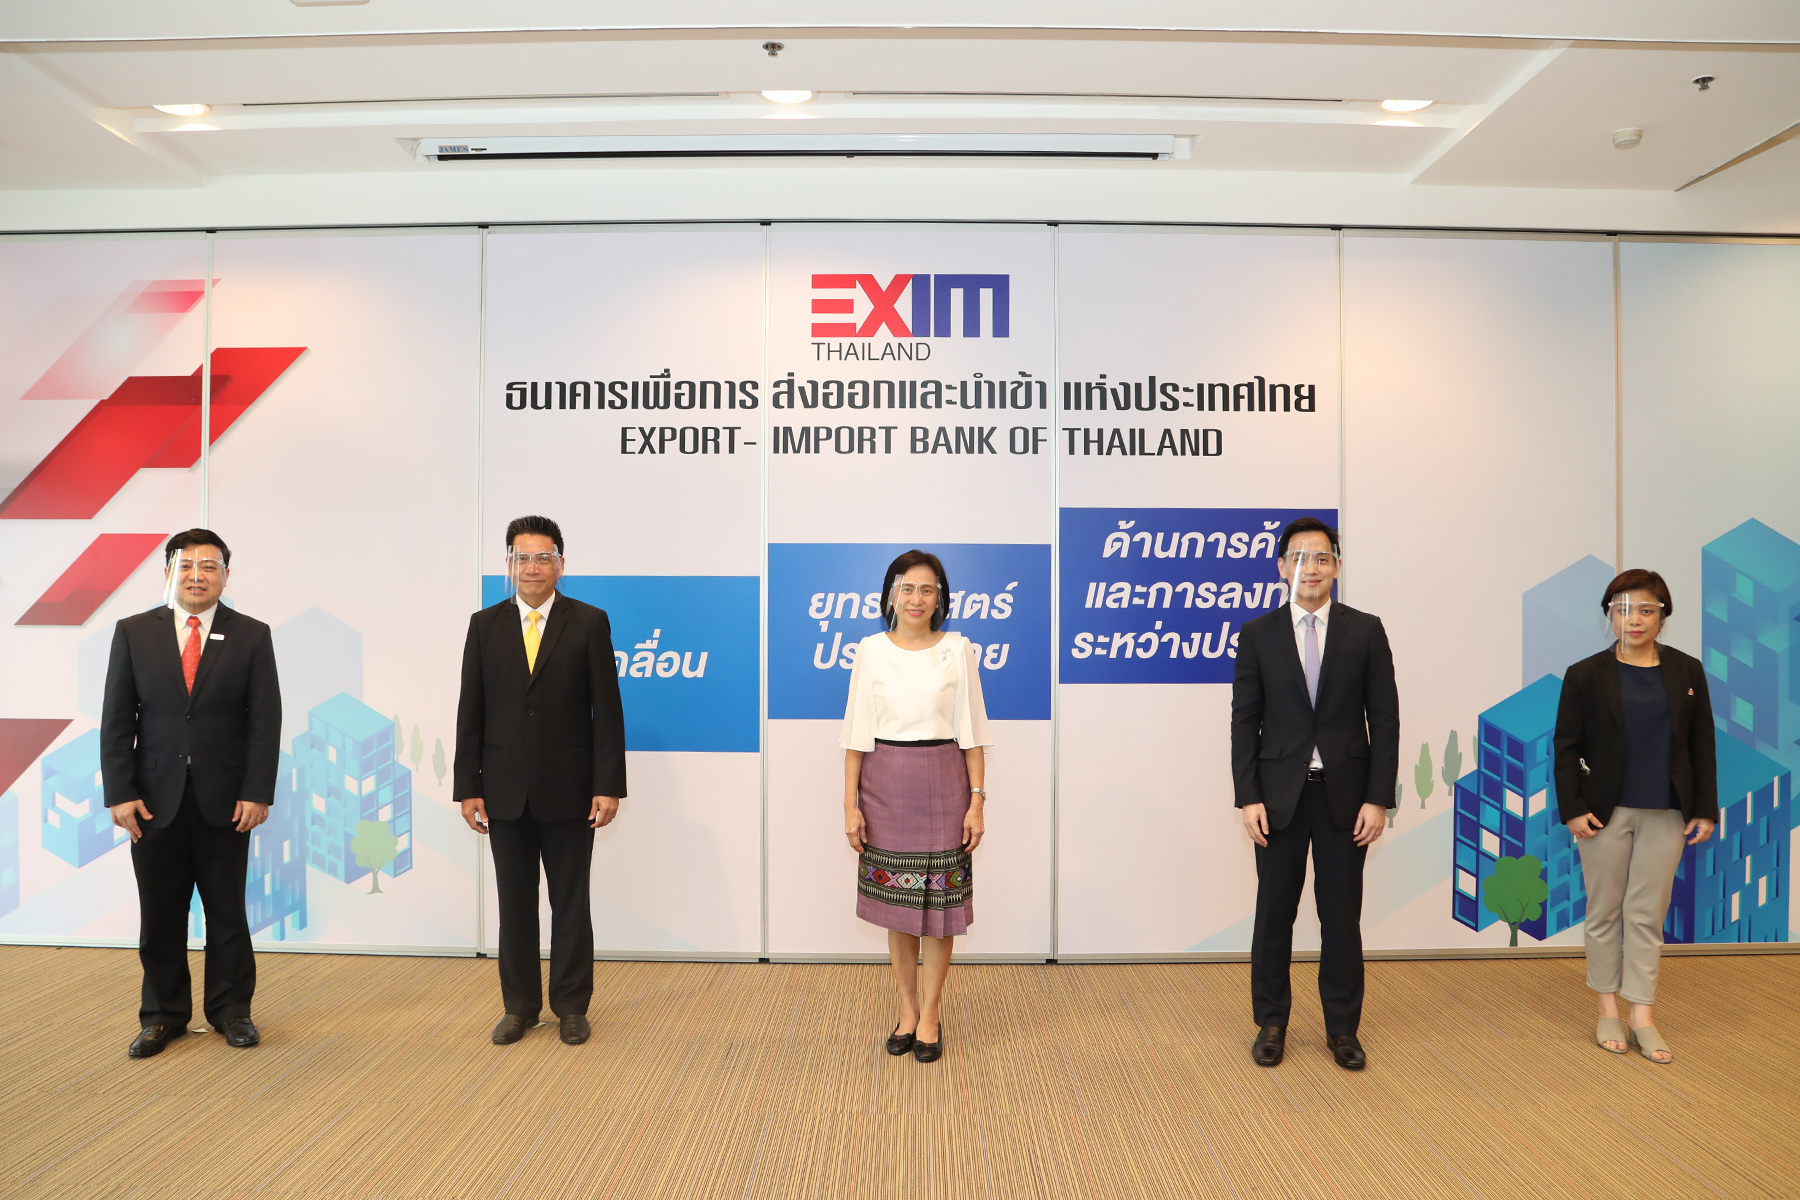 EXIM Thailand Holds Online Advisory Program to Help SMEs Develop Marketing Plans Following the Ease of COVID-19 Lockdown